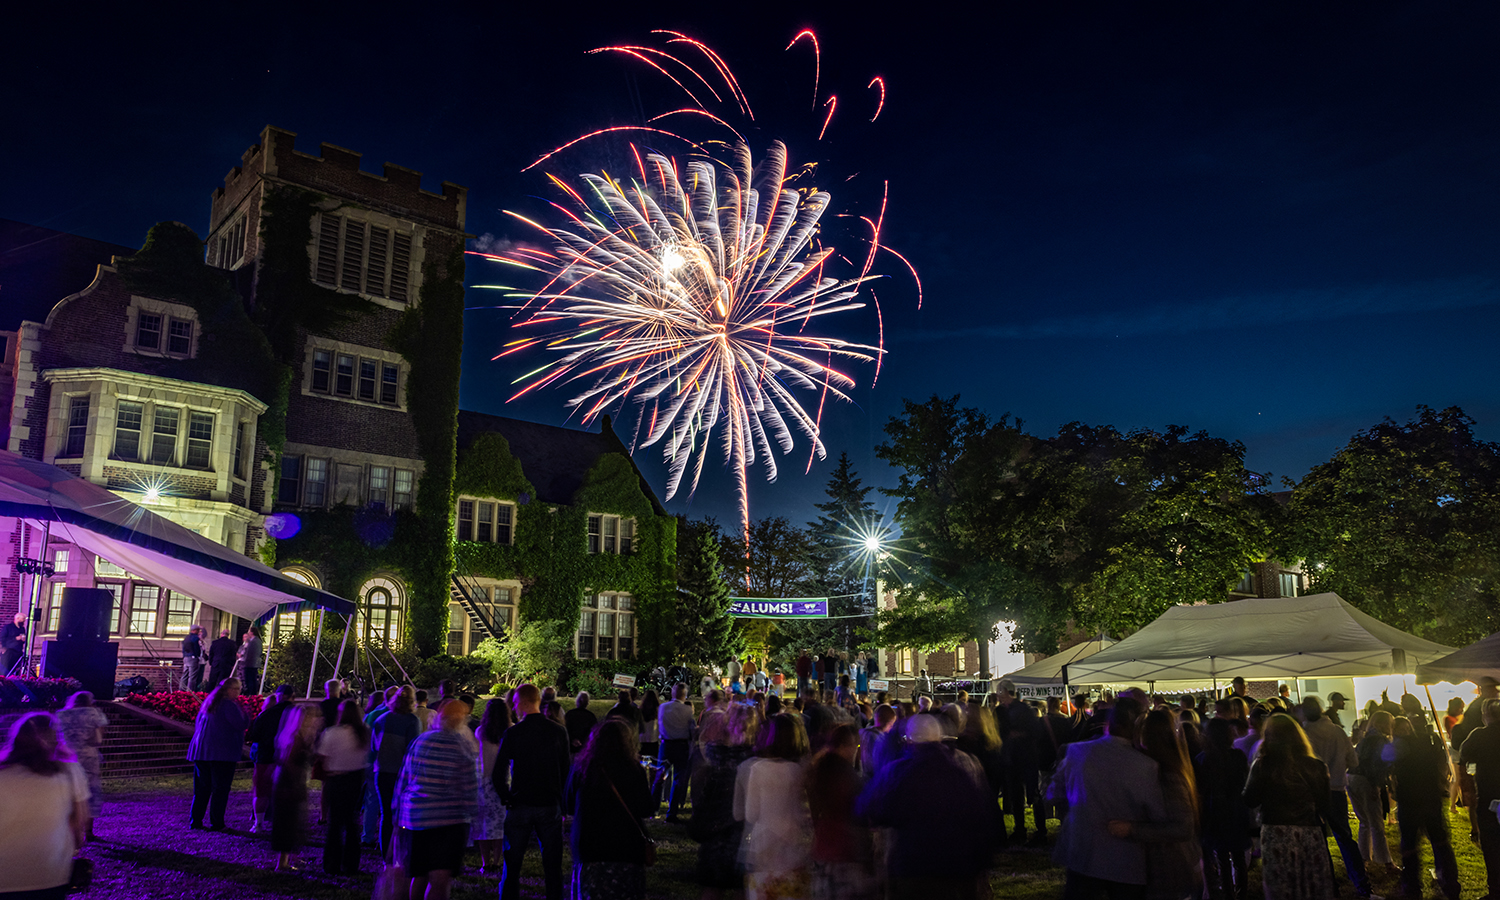 This week, we celebrate Reunion 2023 that brought back hundreds of alums and their families to campus. Here, fireworks fill the sky on Saturday night.